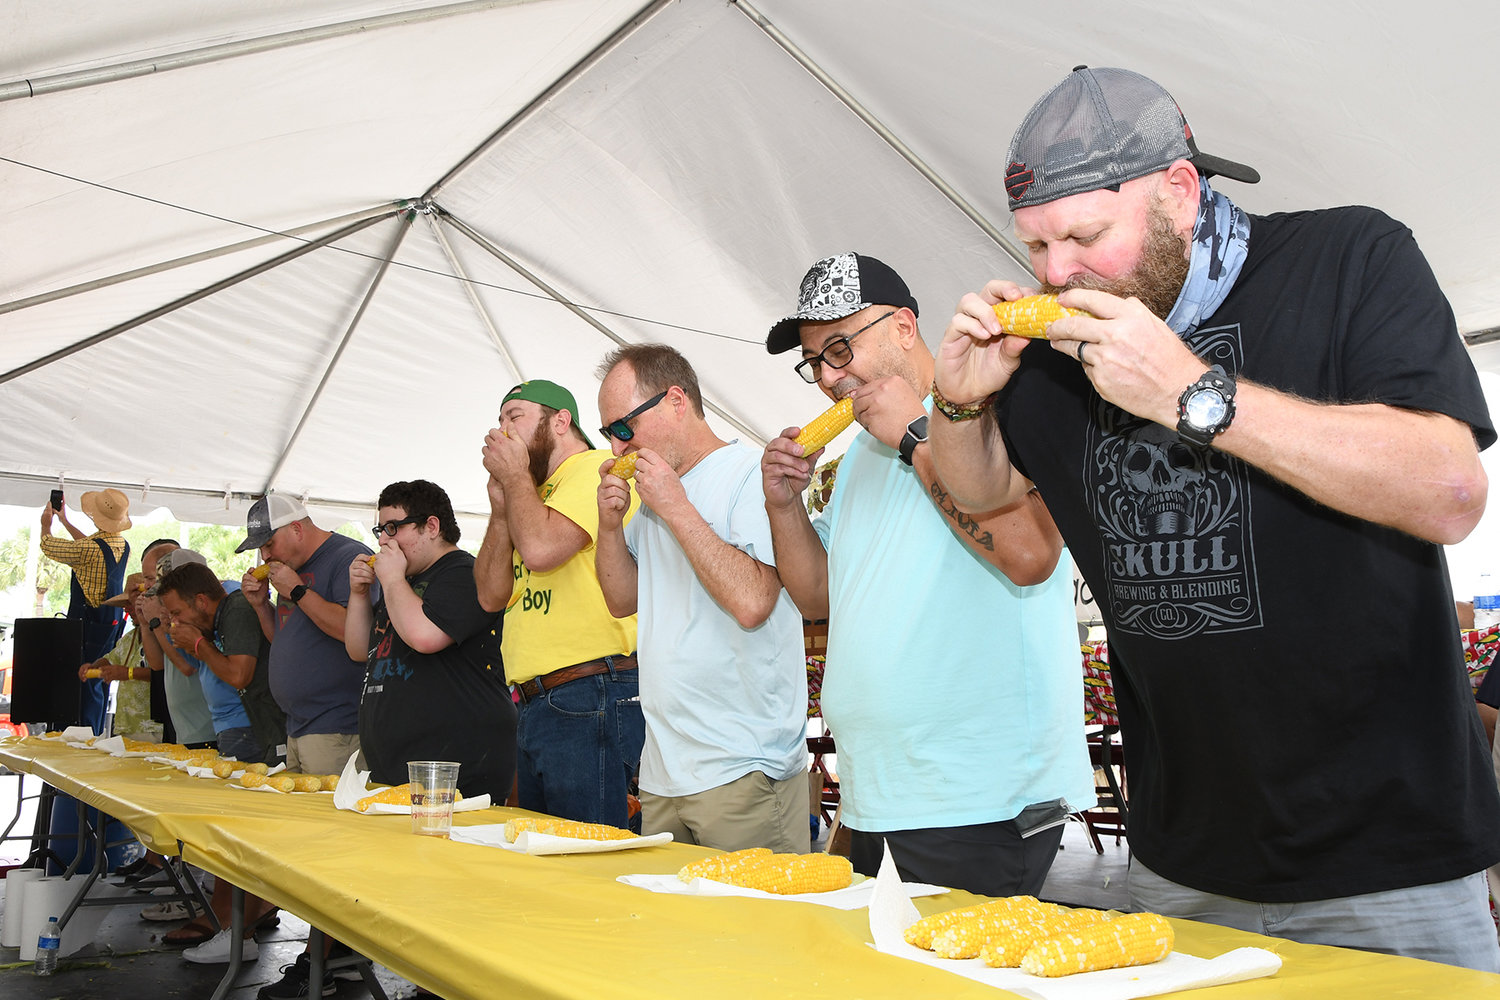 Corn eating contests among both amateur and professional eaters are part of the fun at the Sweet Corn Fiesta.